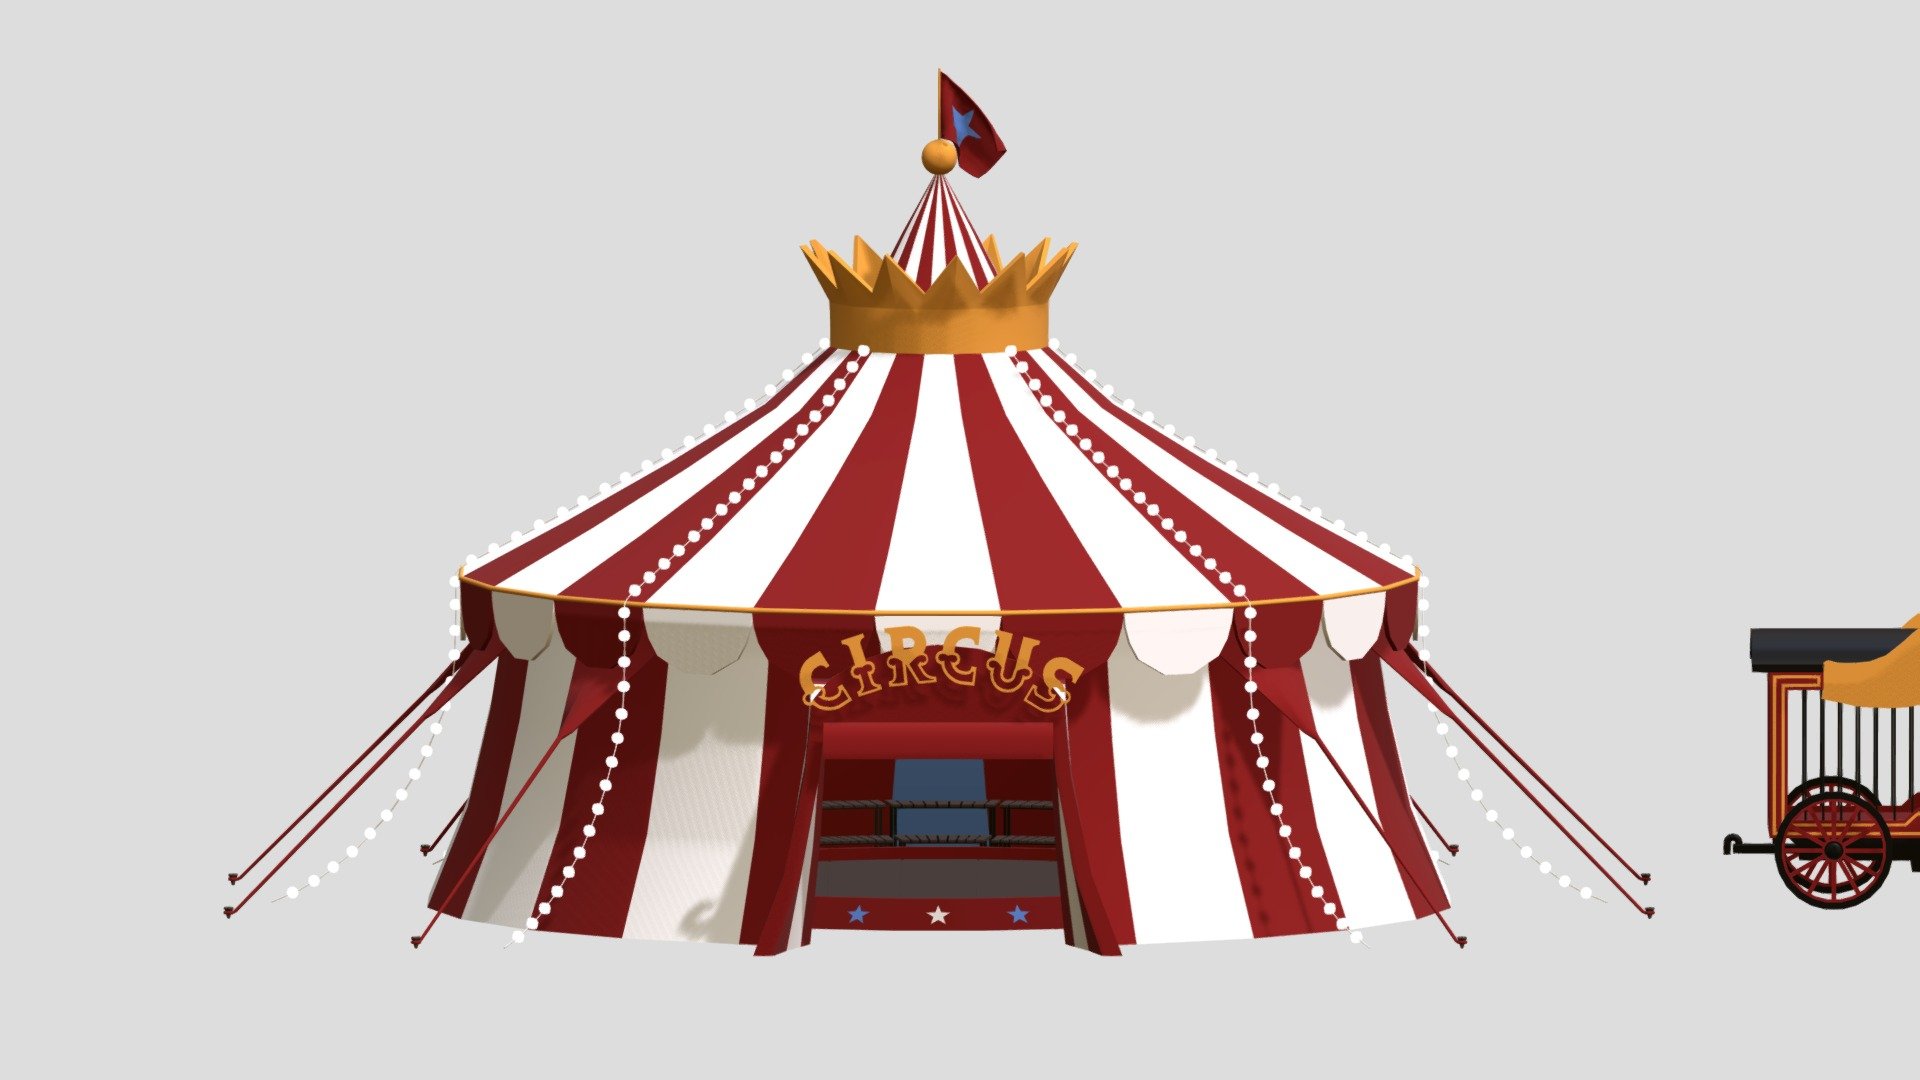 Hello everyone !

I am pleased to present this circus that will blend into any decor of this style! You can integrate this 3d model into all your games or animations and create a unique decor of which only you have the secret ! This pack contains:

Tent
Tightrope
Benches
Vans (pet, artist)
Ticket stand
Balloon stand
Popcorn
Unicycle
Canon
Shooting target
Juggling accessories
Balloon balance
Barrel and box
In fact, everything you see in the images above. Let yourself be carried away by your imagination ! Enjoy !

Made with blender - Circus - Buy Royalty Free 3D model by ApprenticeRaccoon 3d model